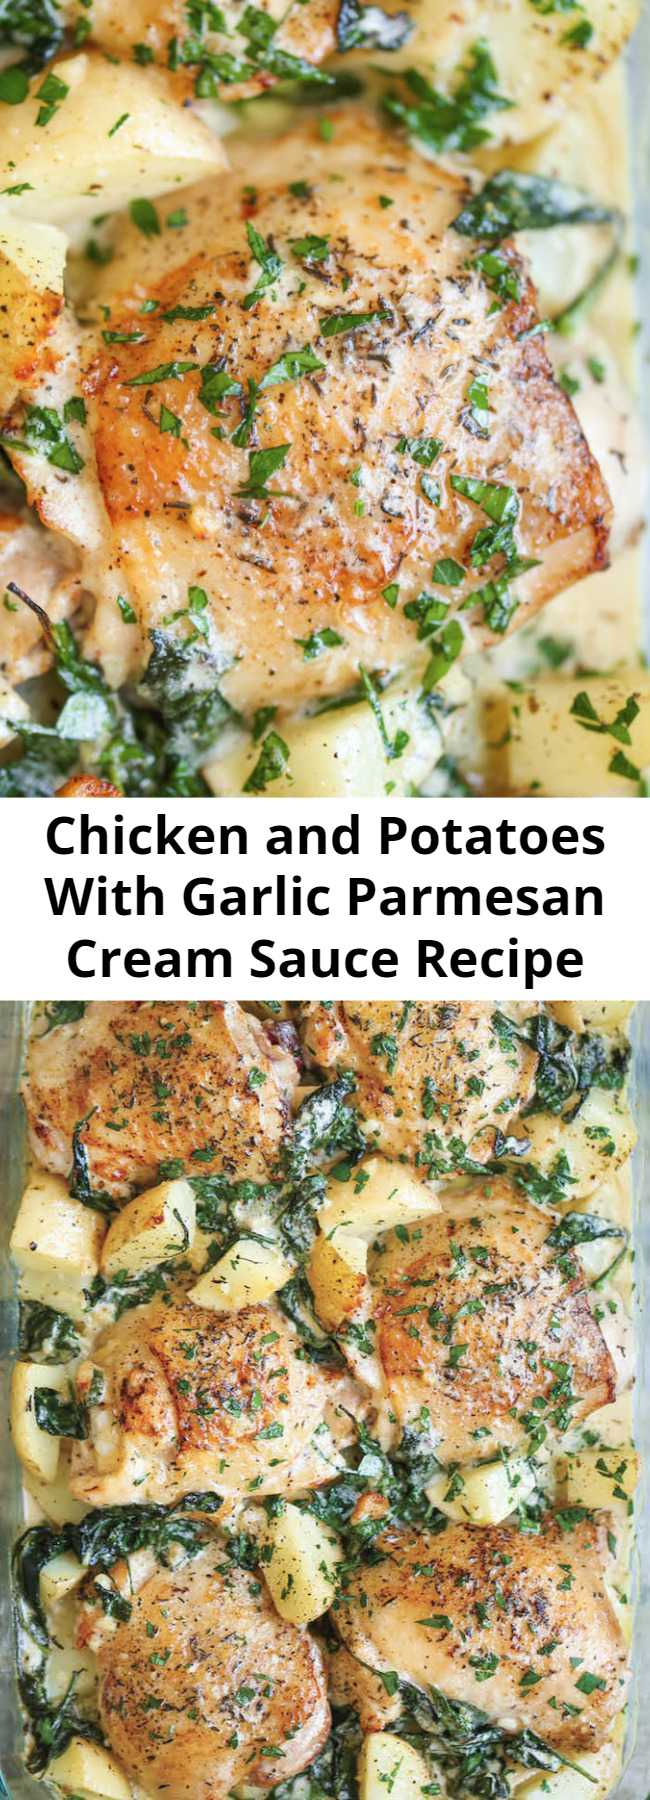 Chicken and Potatoes With Garlic Parmesan Cream Sauce Recipe - Crisp-tender chicken baked to absolute perfection with potatoes and spinach. A complete meal in one!